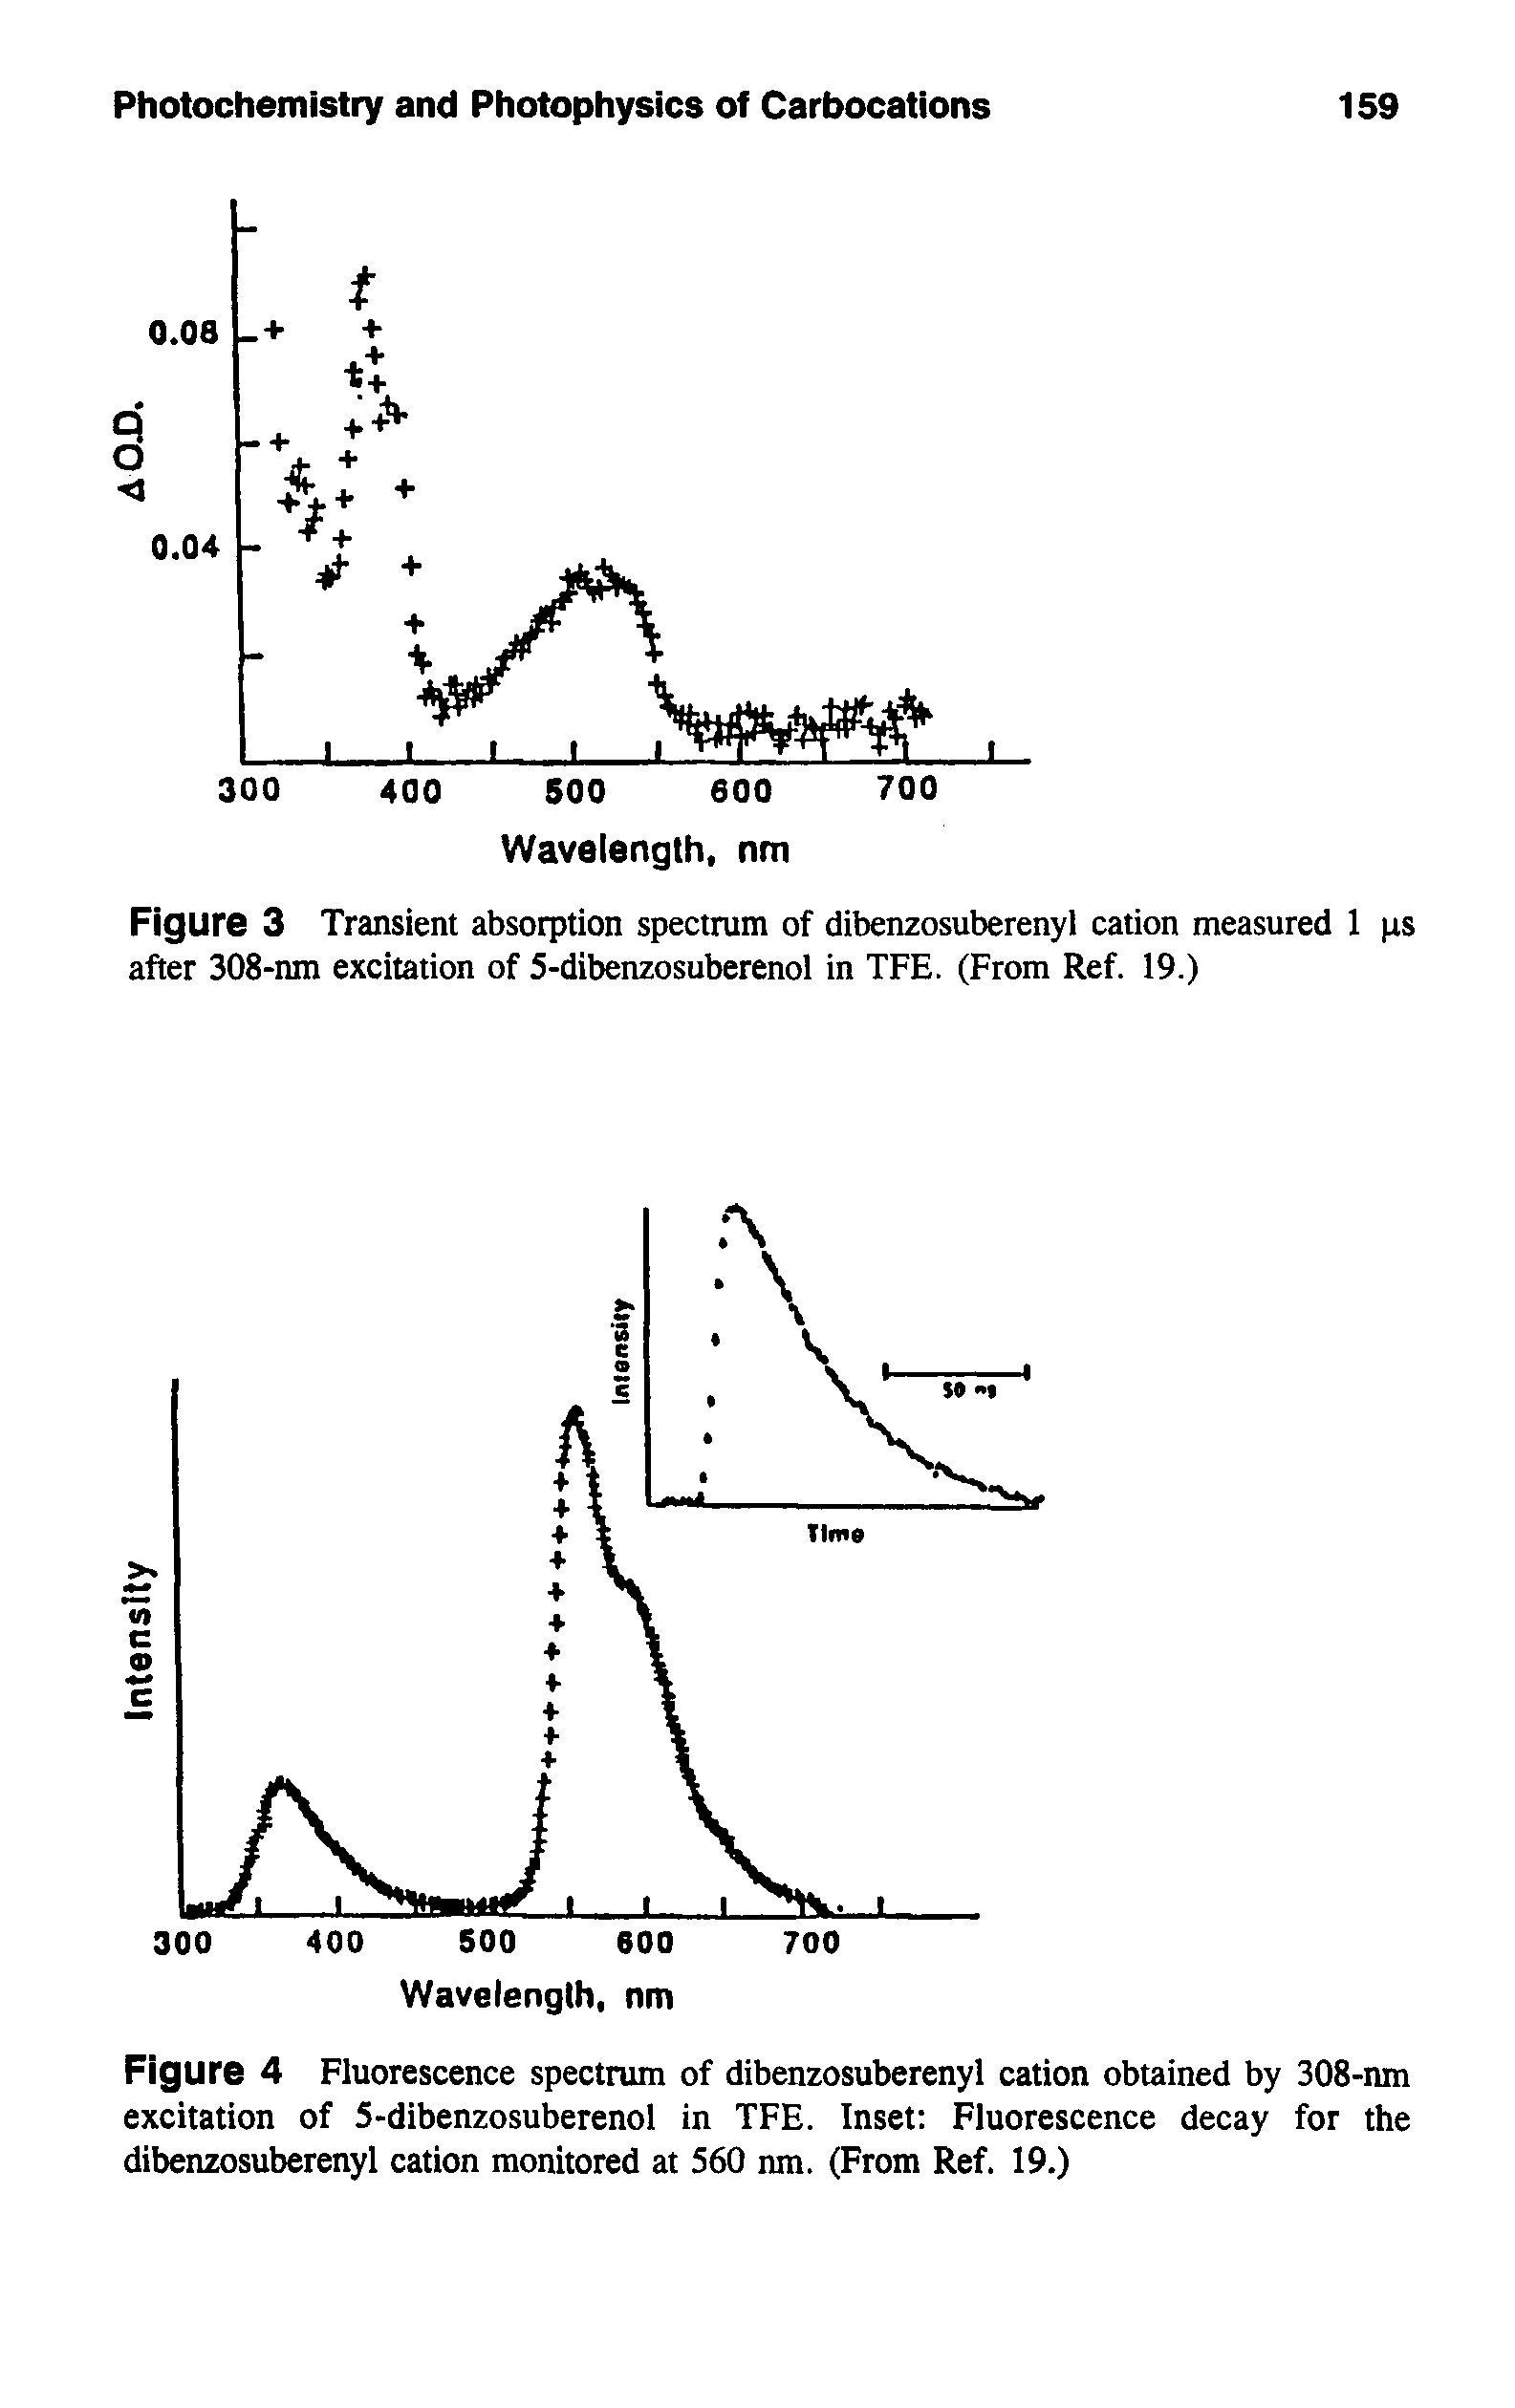 Figure 3 Transient absorption spectrum of dibenzosuberenyl cation measured 1 ps after 308-nm excitation of 5-dibenzosuberenol in TFE. (From Ref. 19.)...